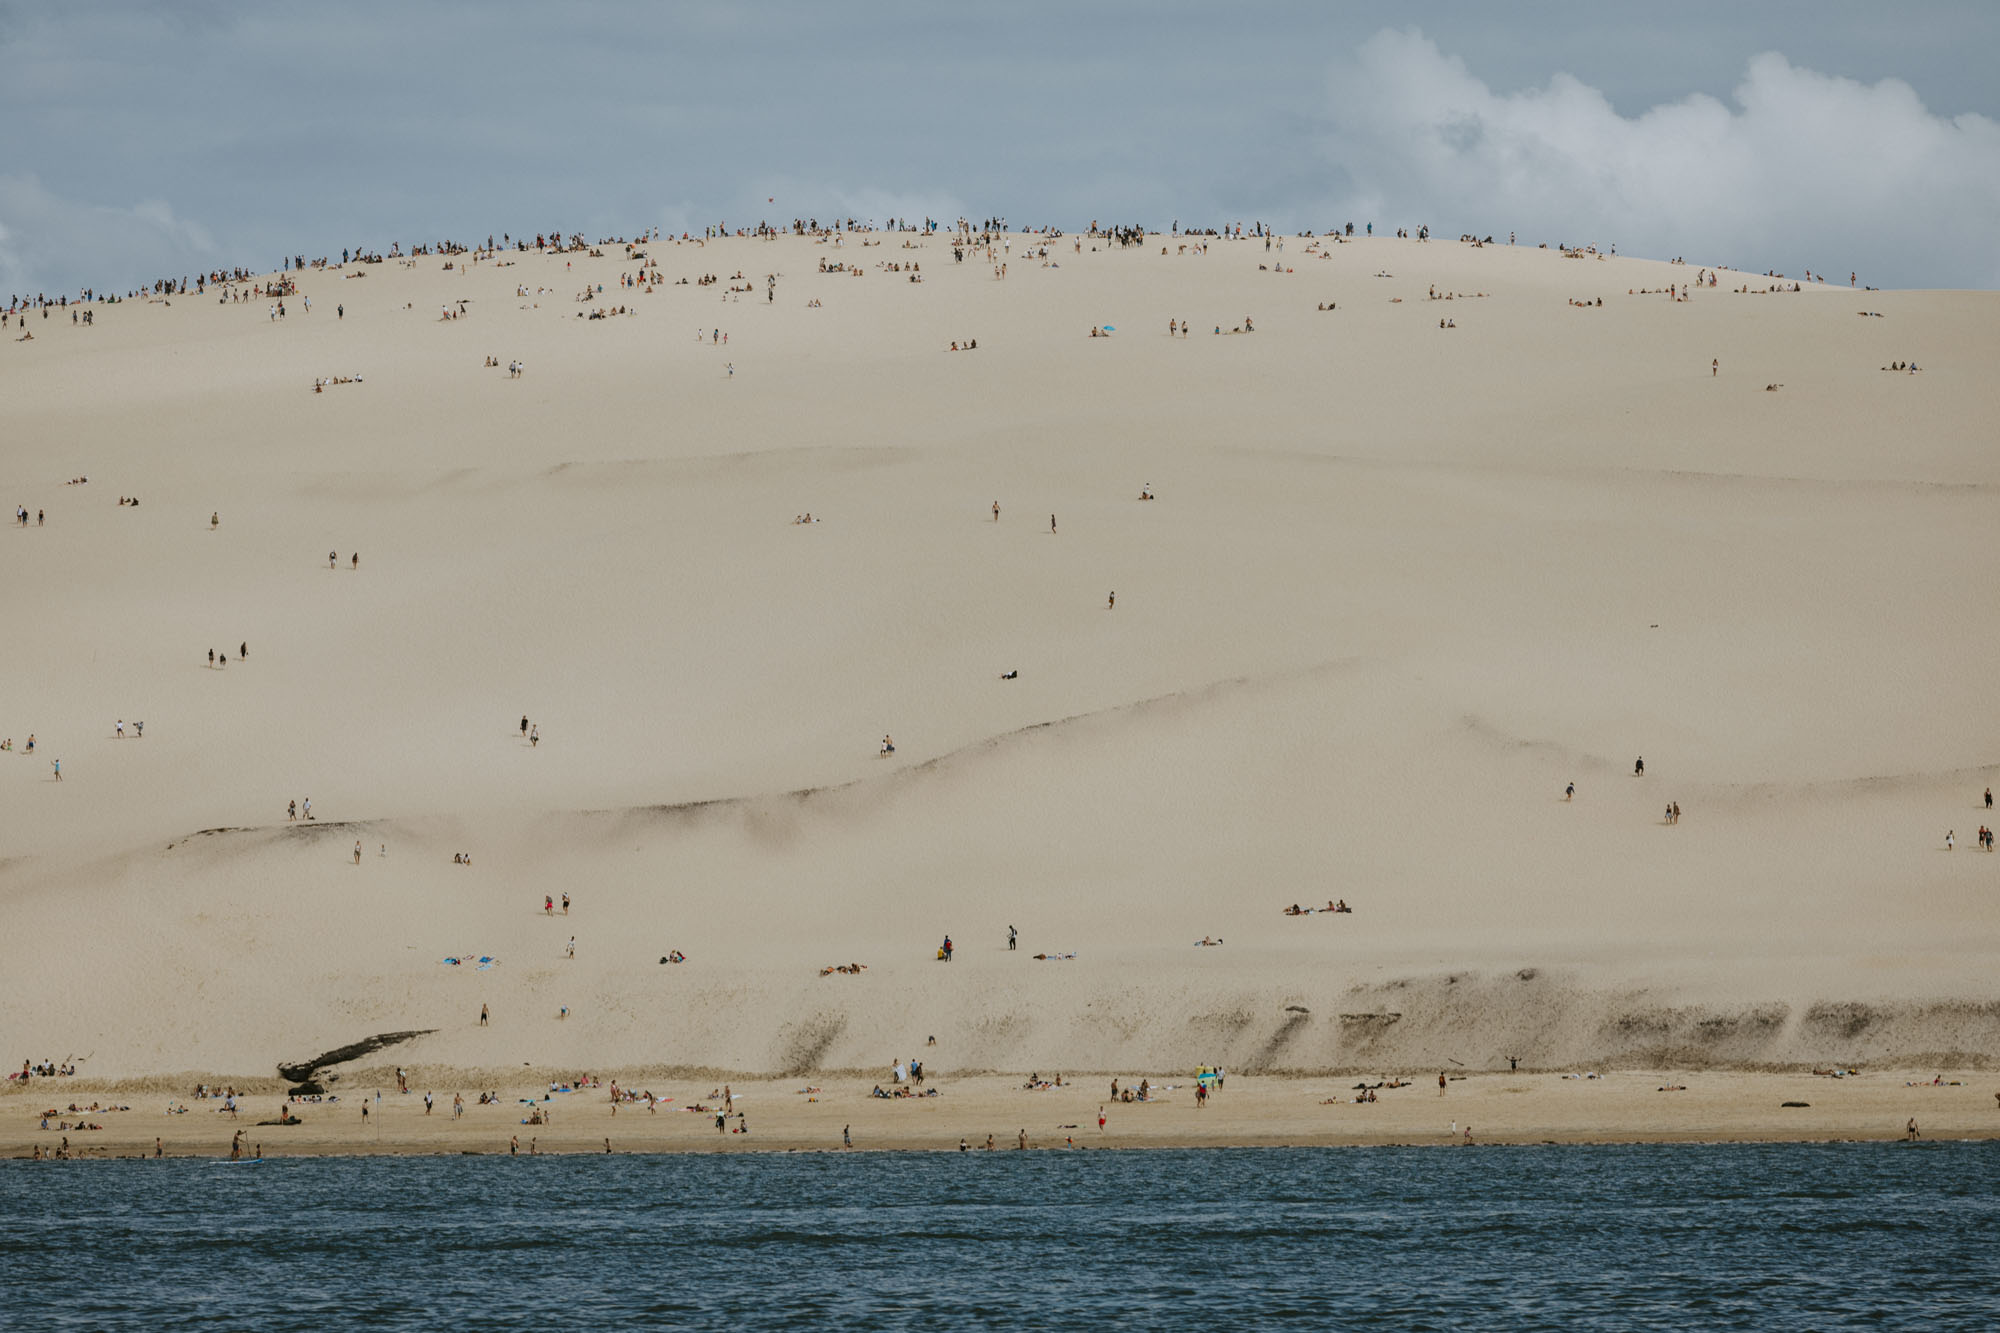 Arcachon wedding photographer: the bay boat is sailing at the botton of Dune du Pyla and all the wedding guests observe the tourists enjoying this landmark and looking like tiny dots